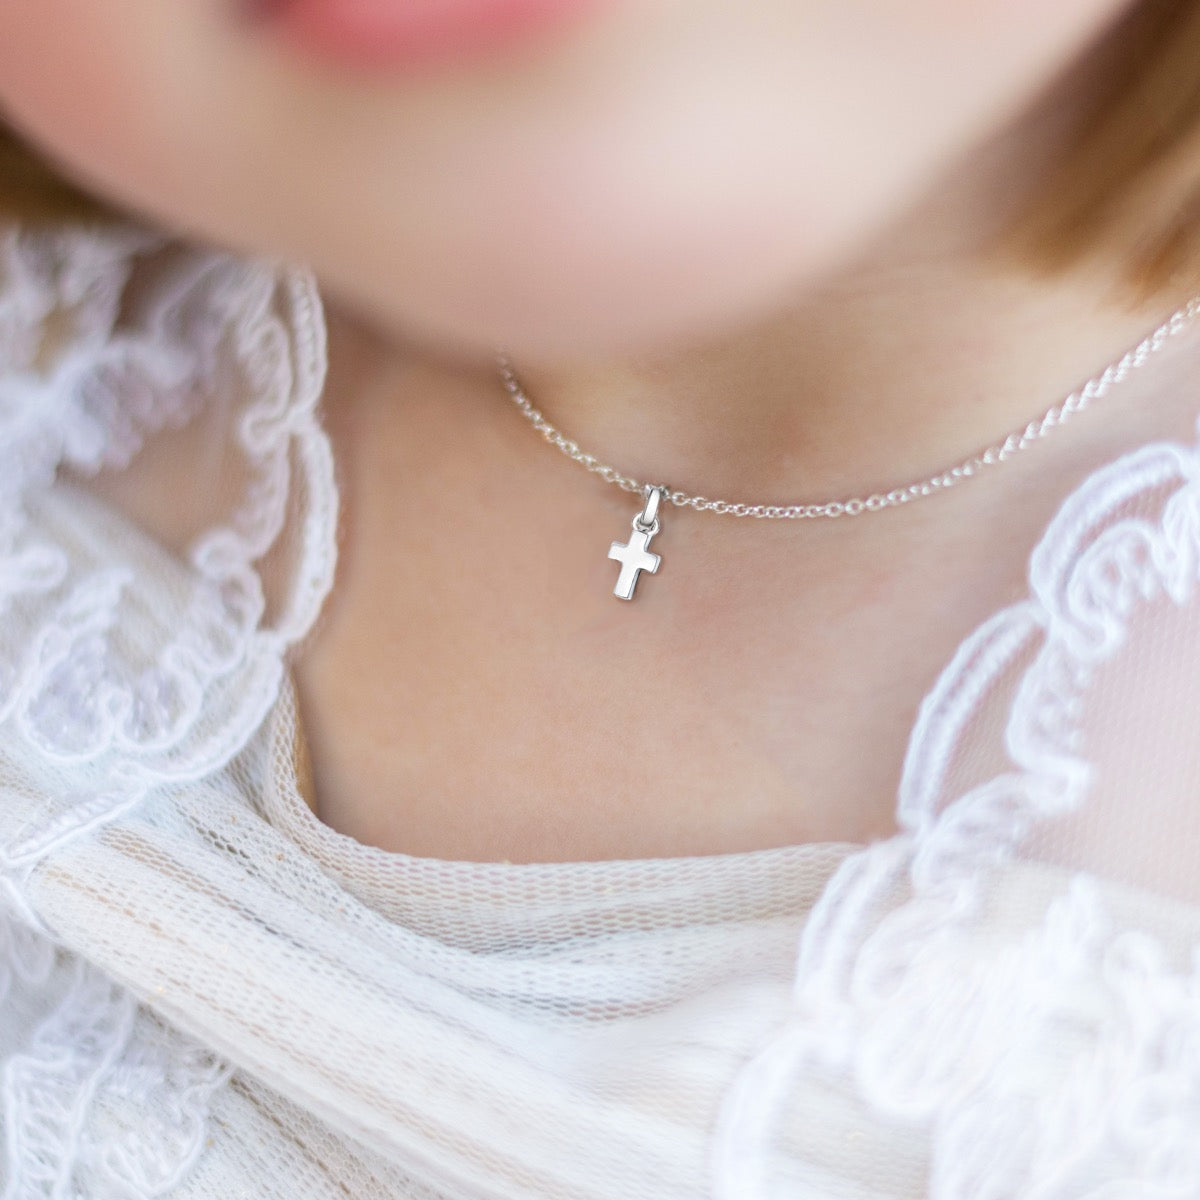 Sterling Silver Childs Christening Cross Necklace